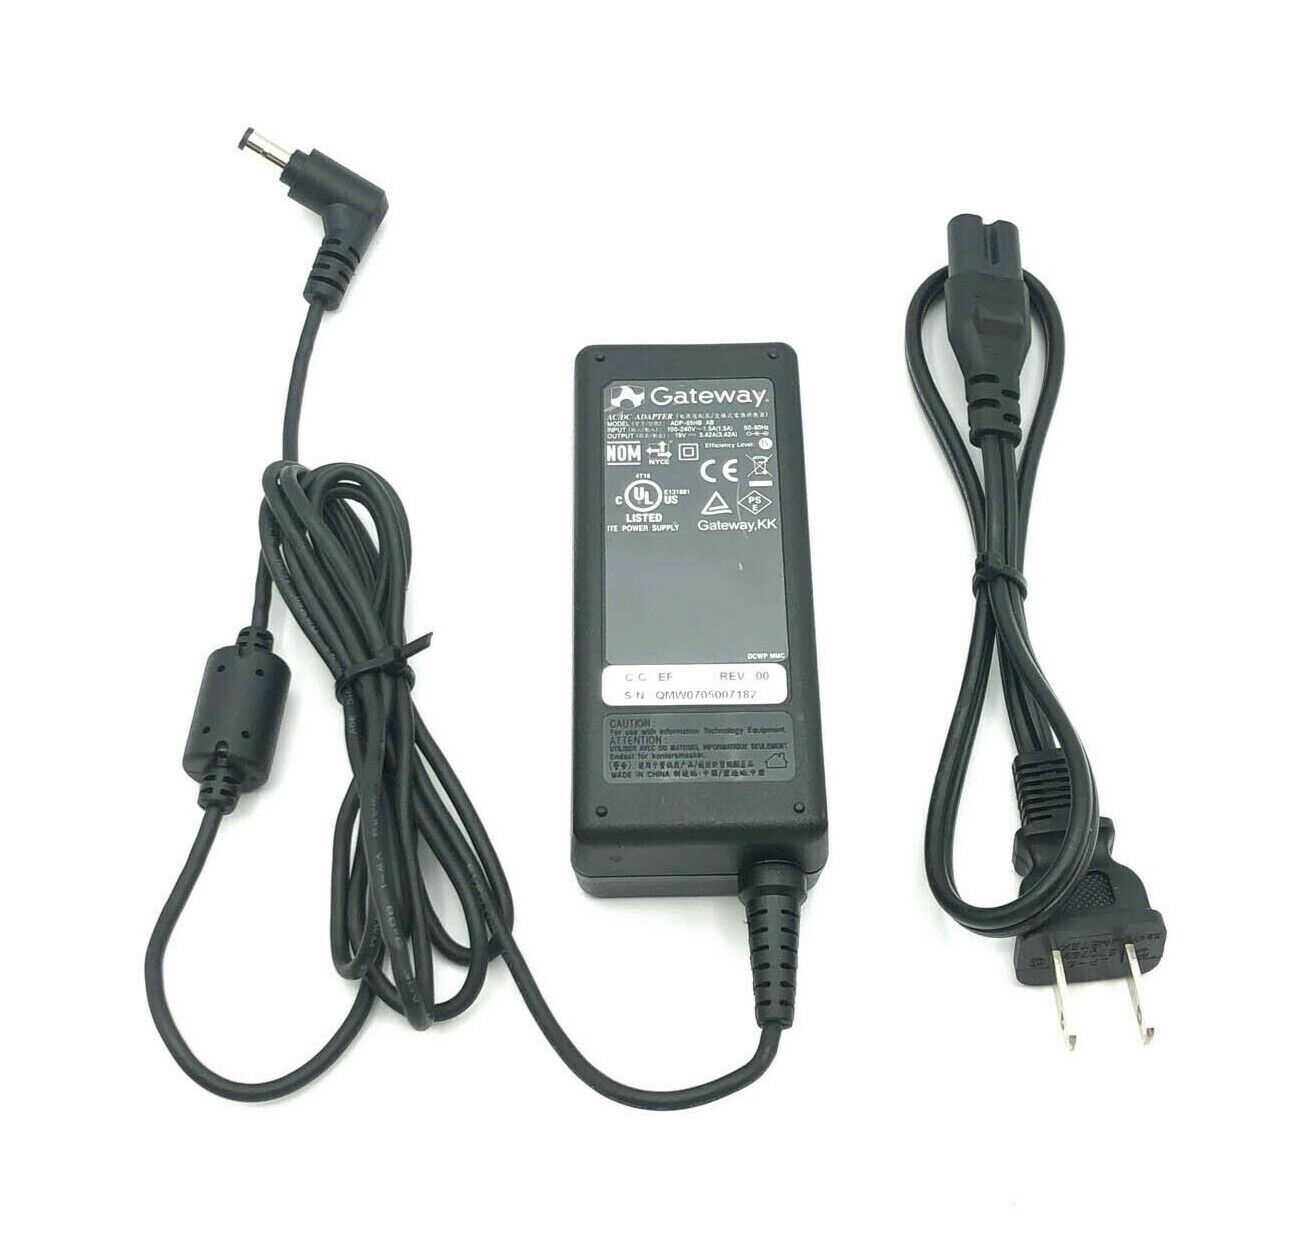 Original Gateway AC Charger Adapter for Compaq CM2000 Series Laptop w/Power Cord